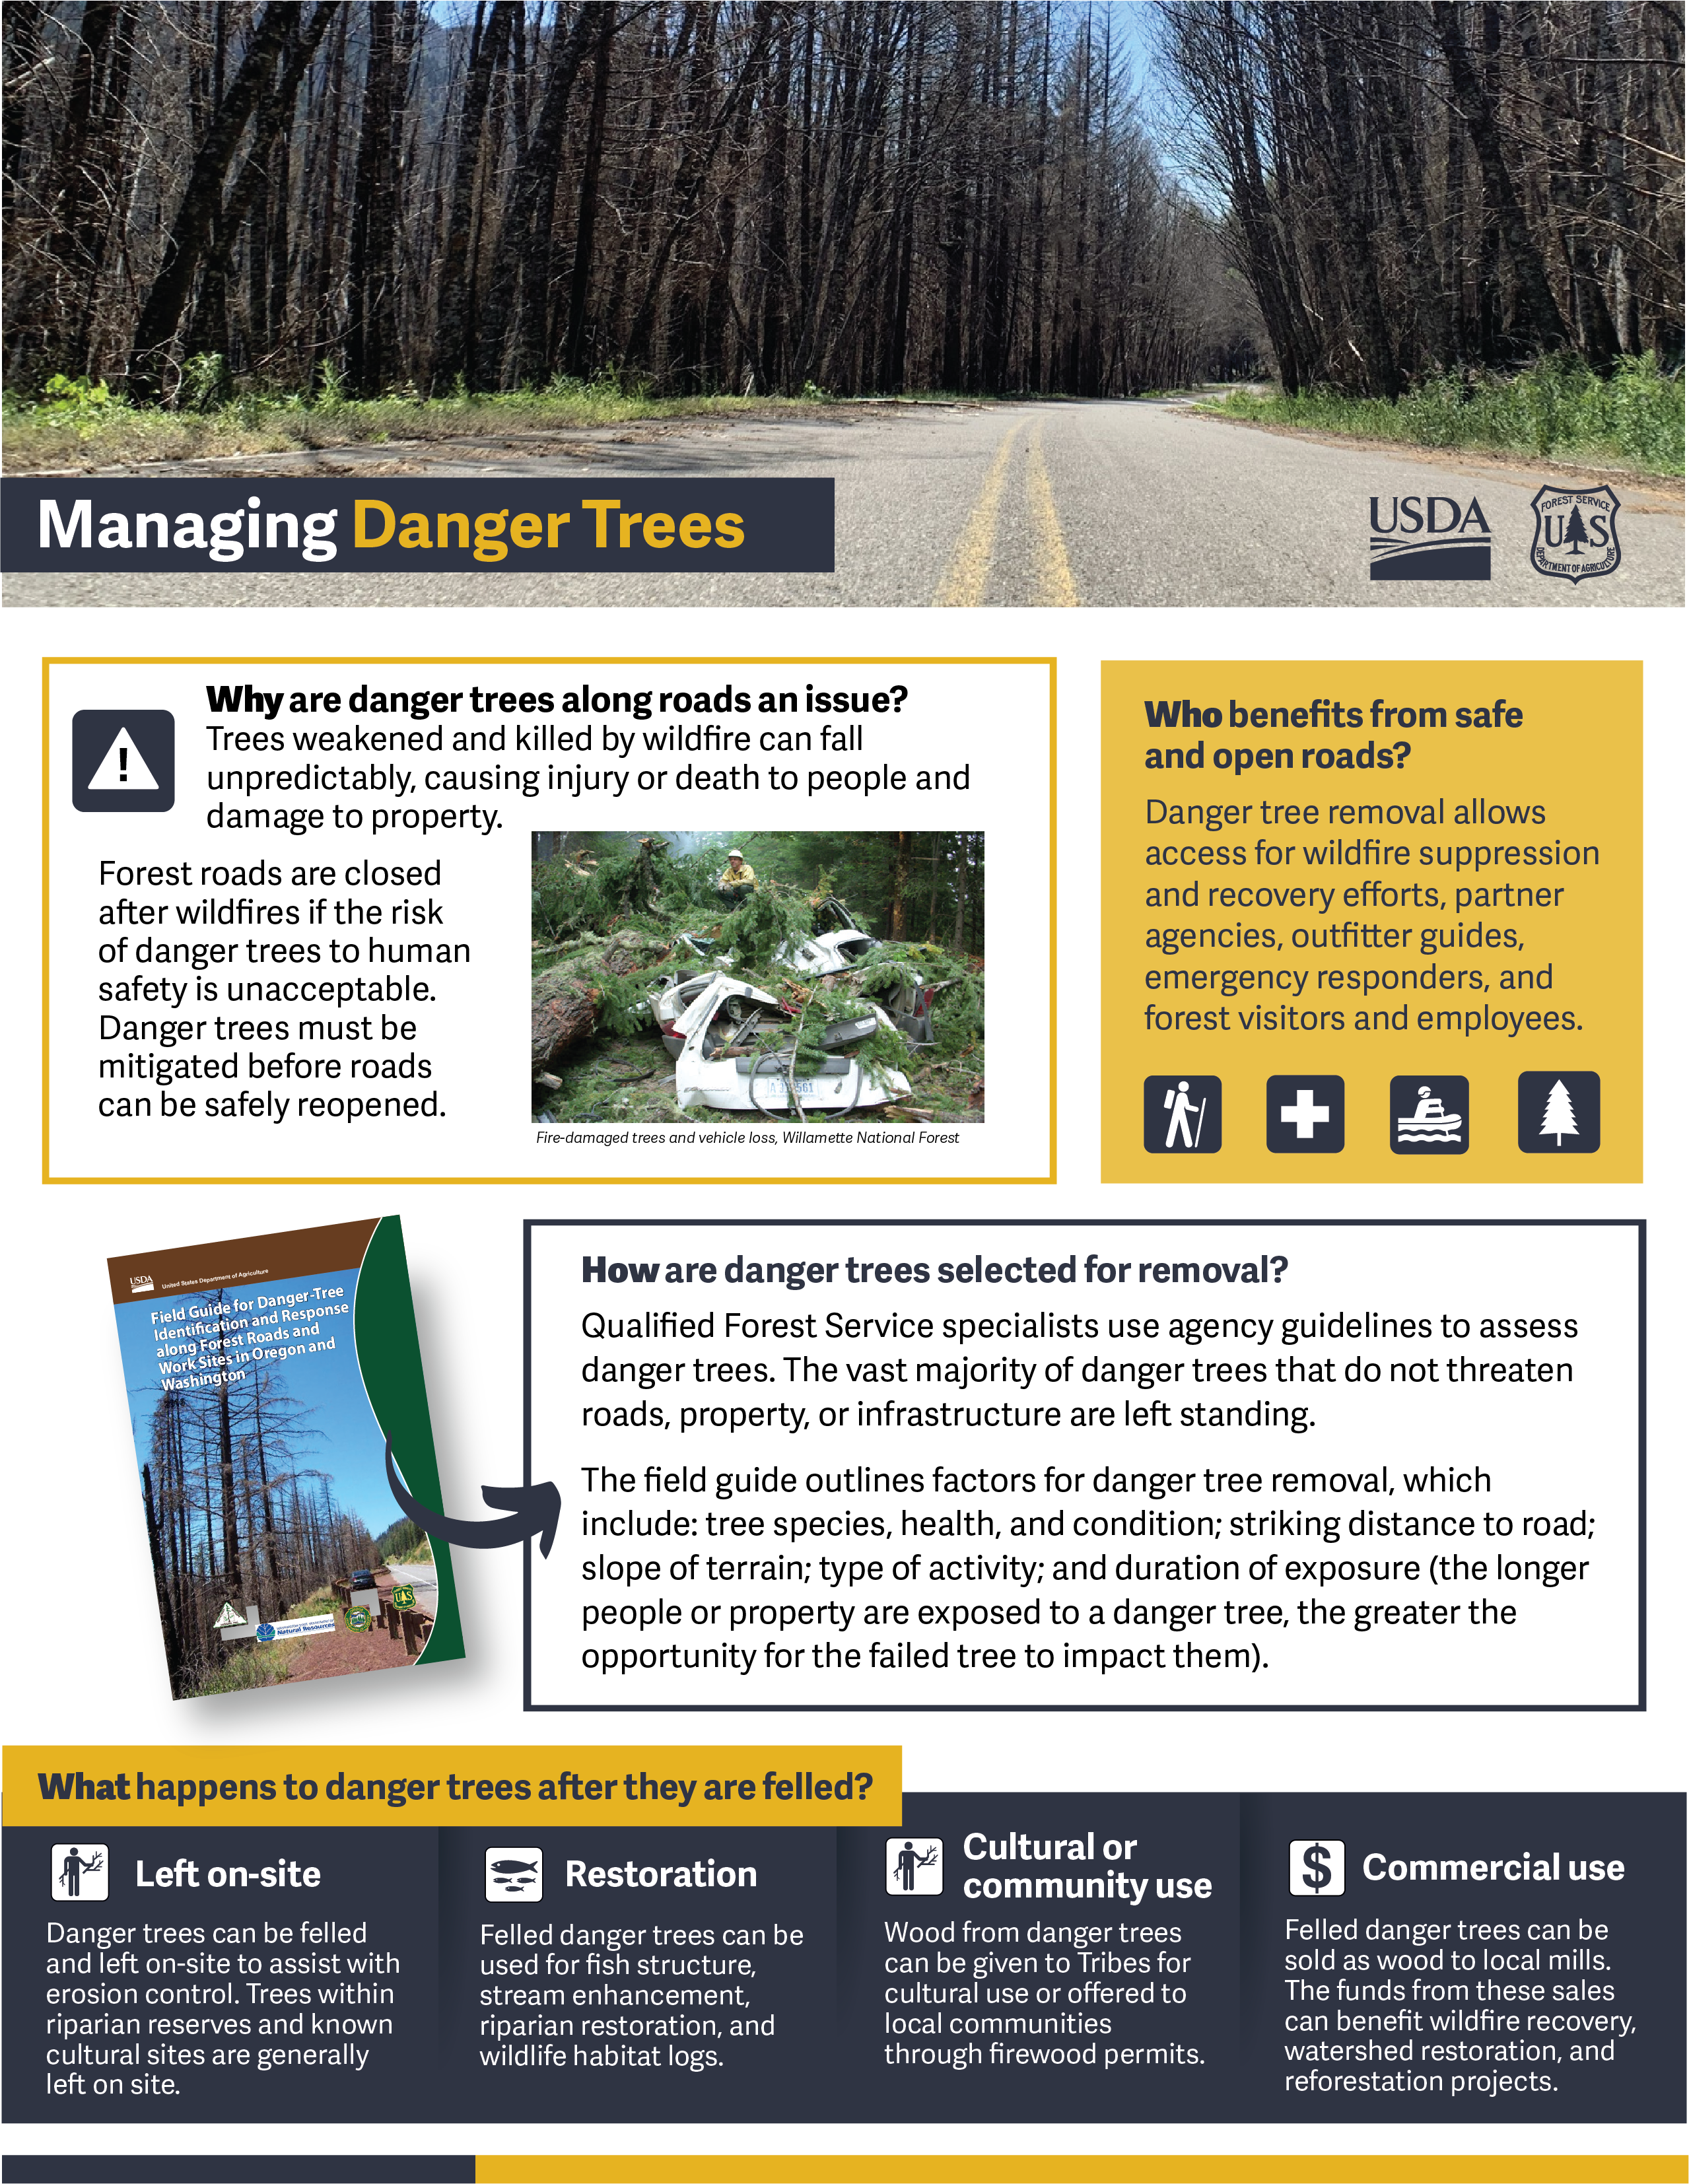 A graphic that shows why danger trees are an issue. A photo shows burned trees next to a road.